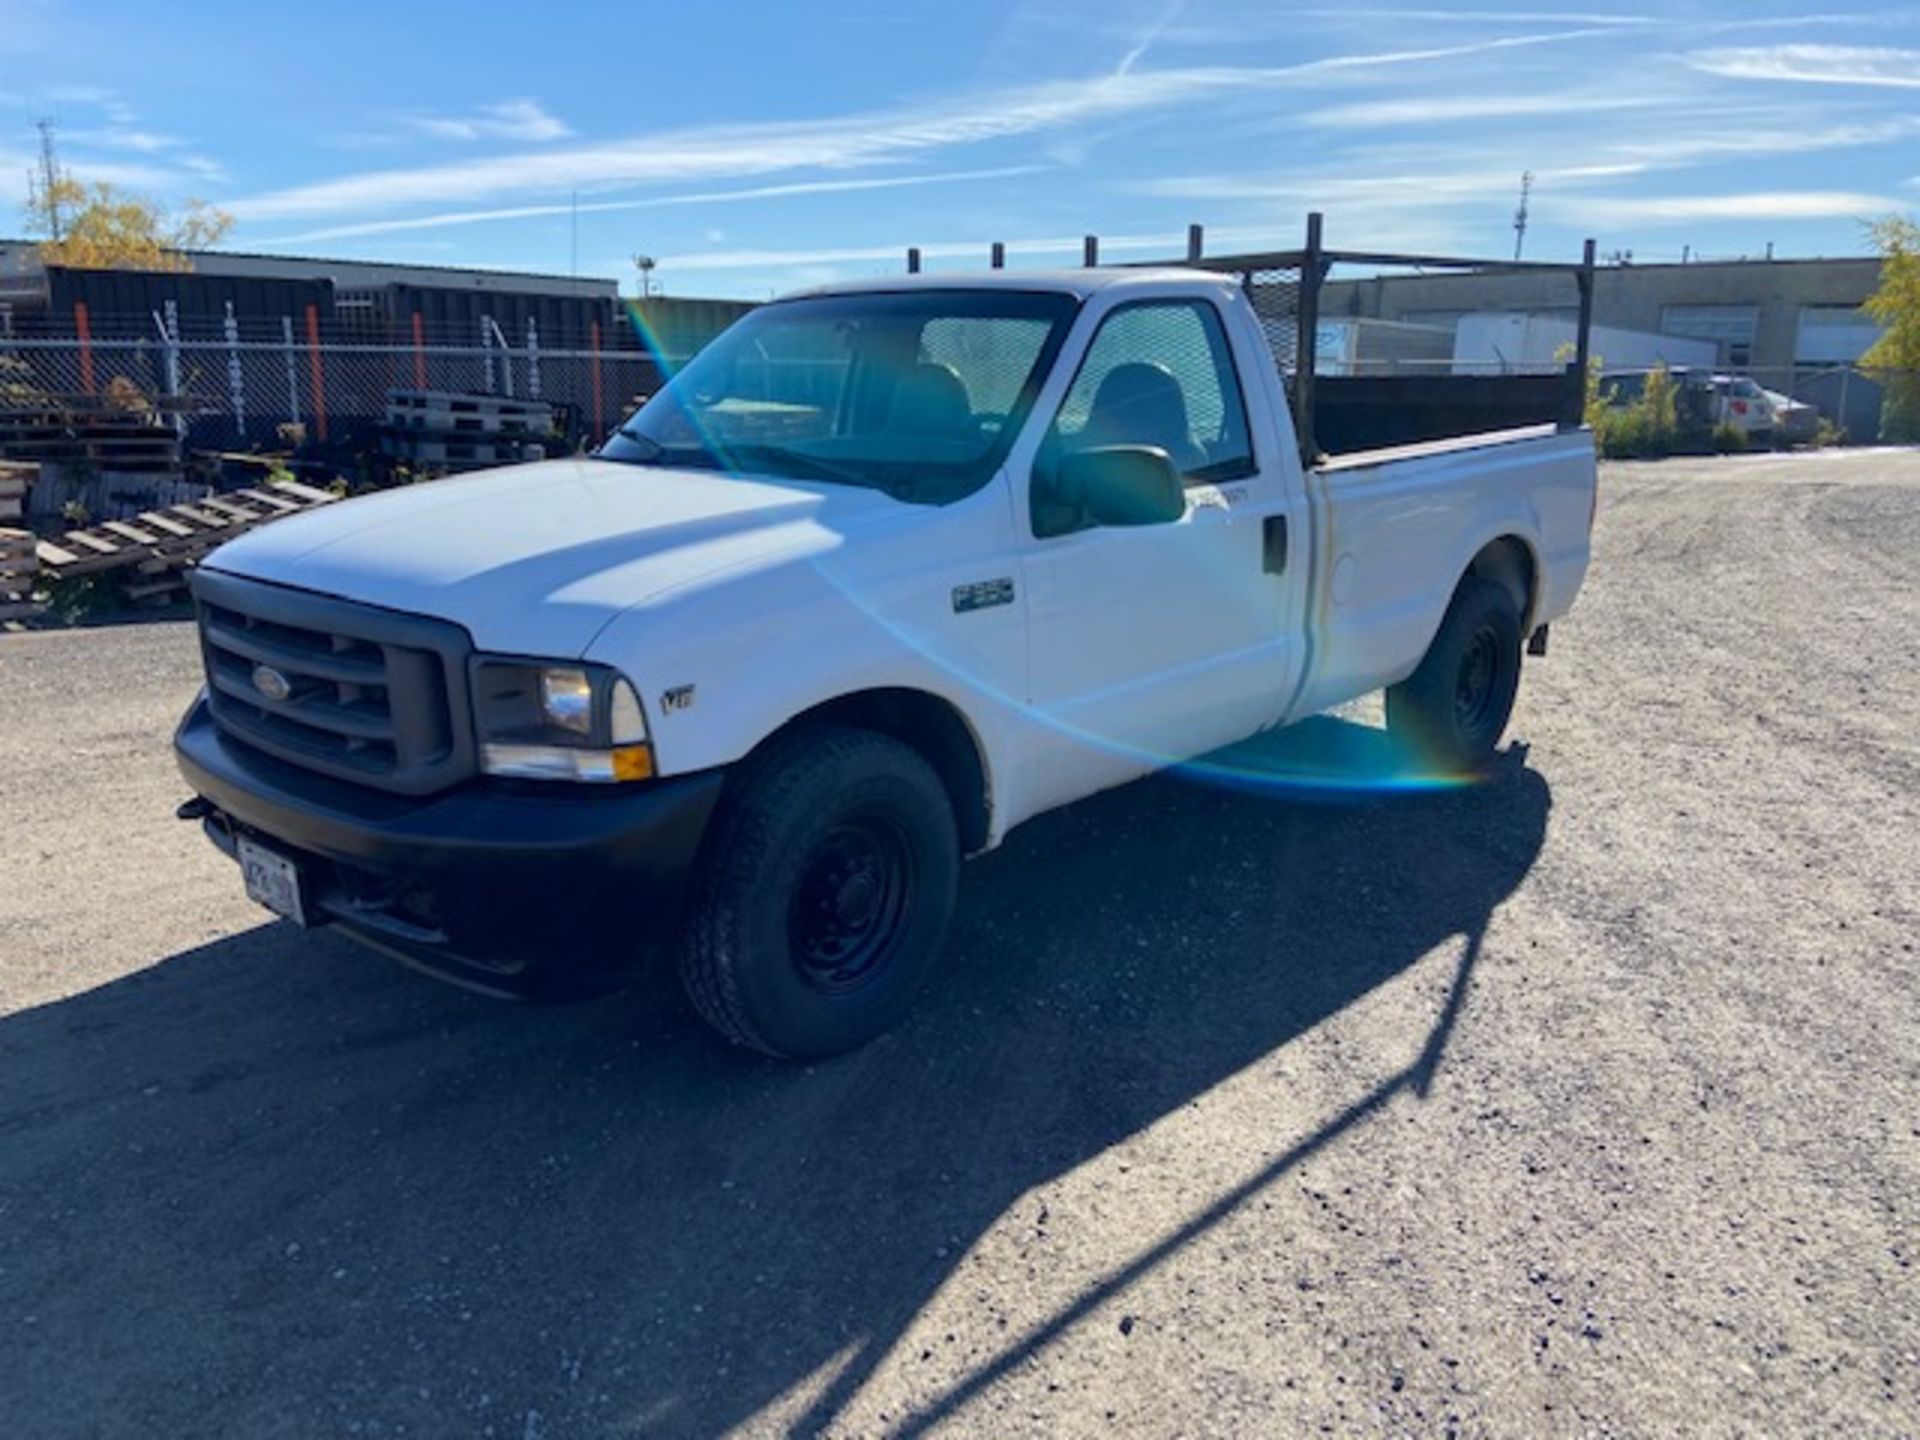 2002 Ford F-350 Pickup Truck with Hydraulic Lift Gate and Racks - NEW 2016 engine - 140,000km